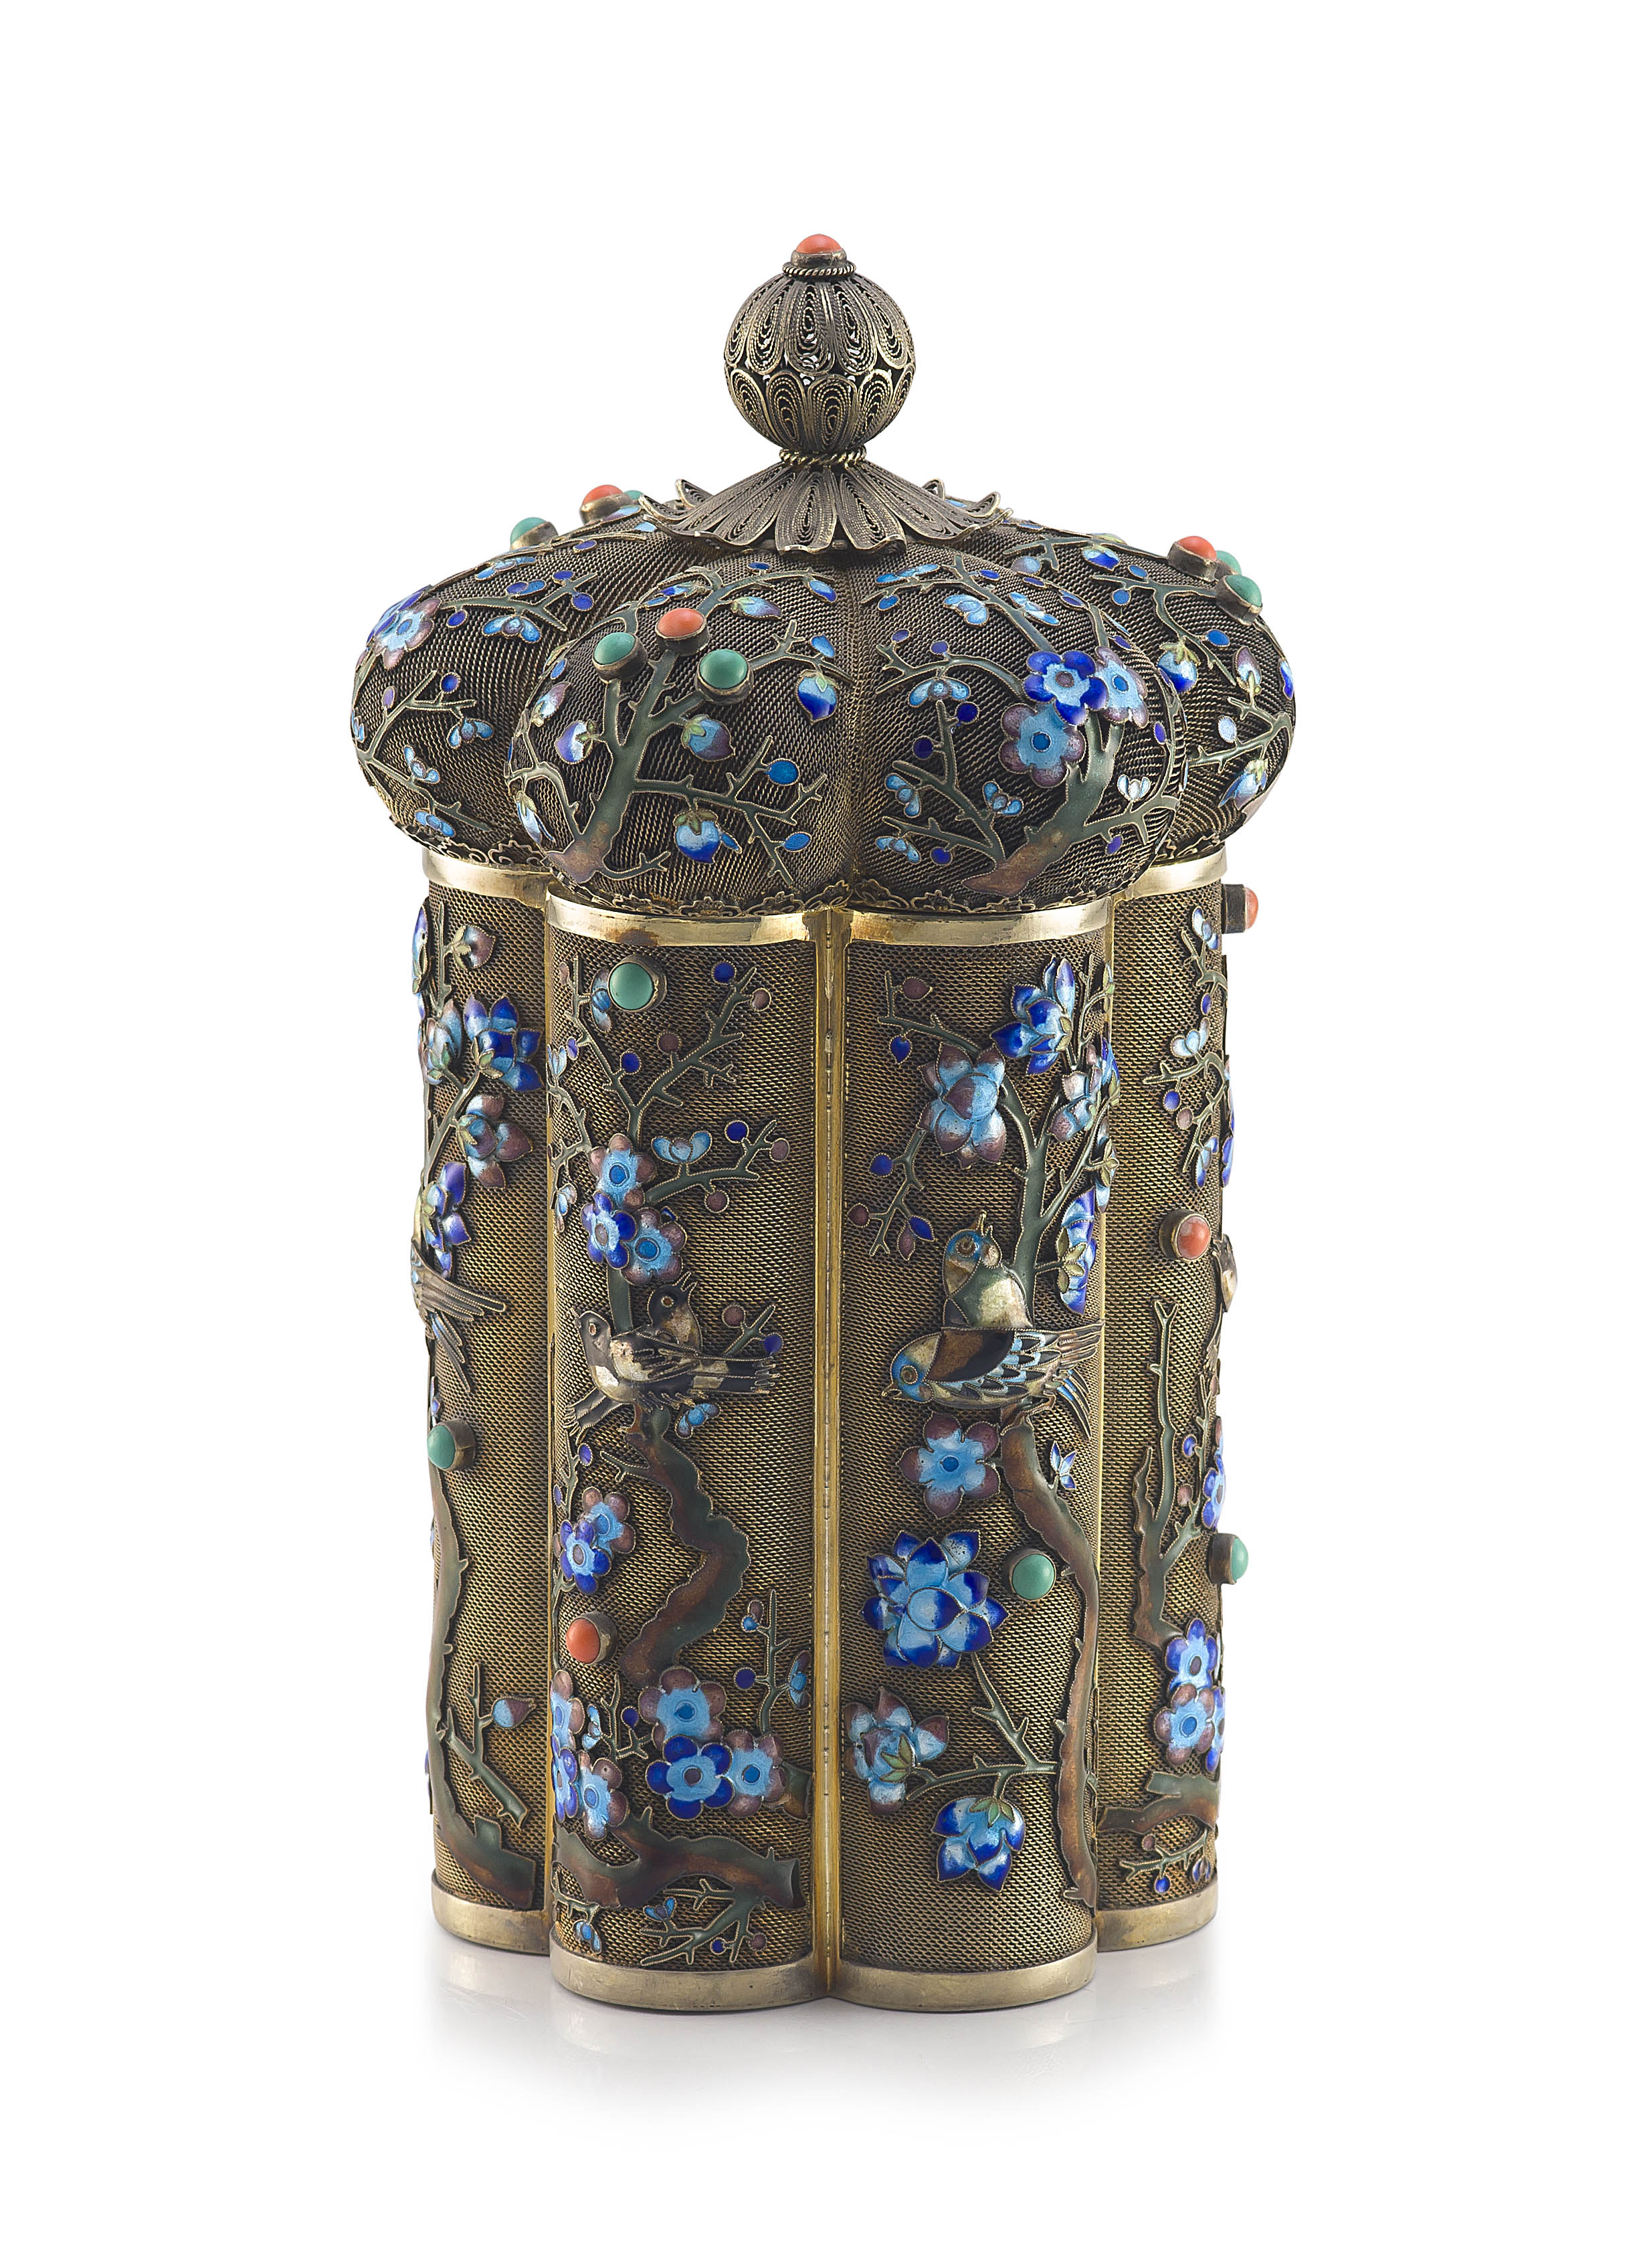 A Chinese silver-gilt mesh and enamel tea caddy, 20th century